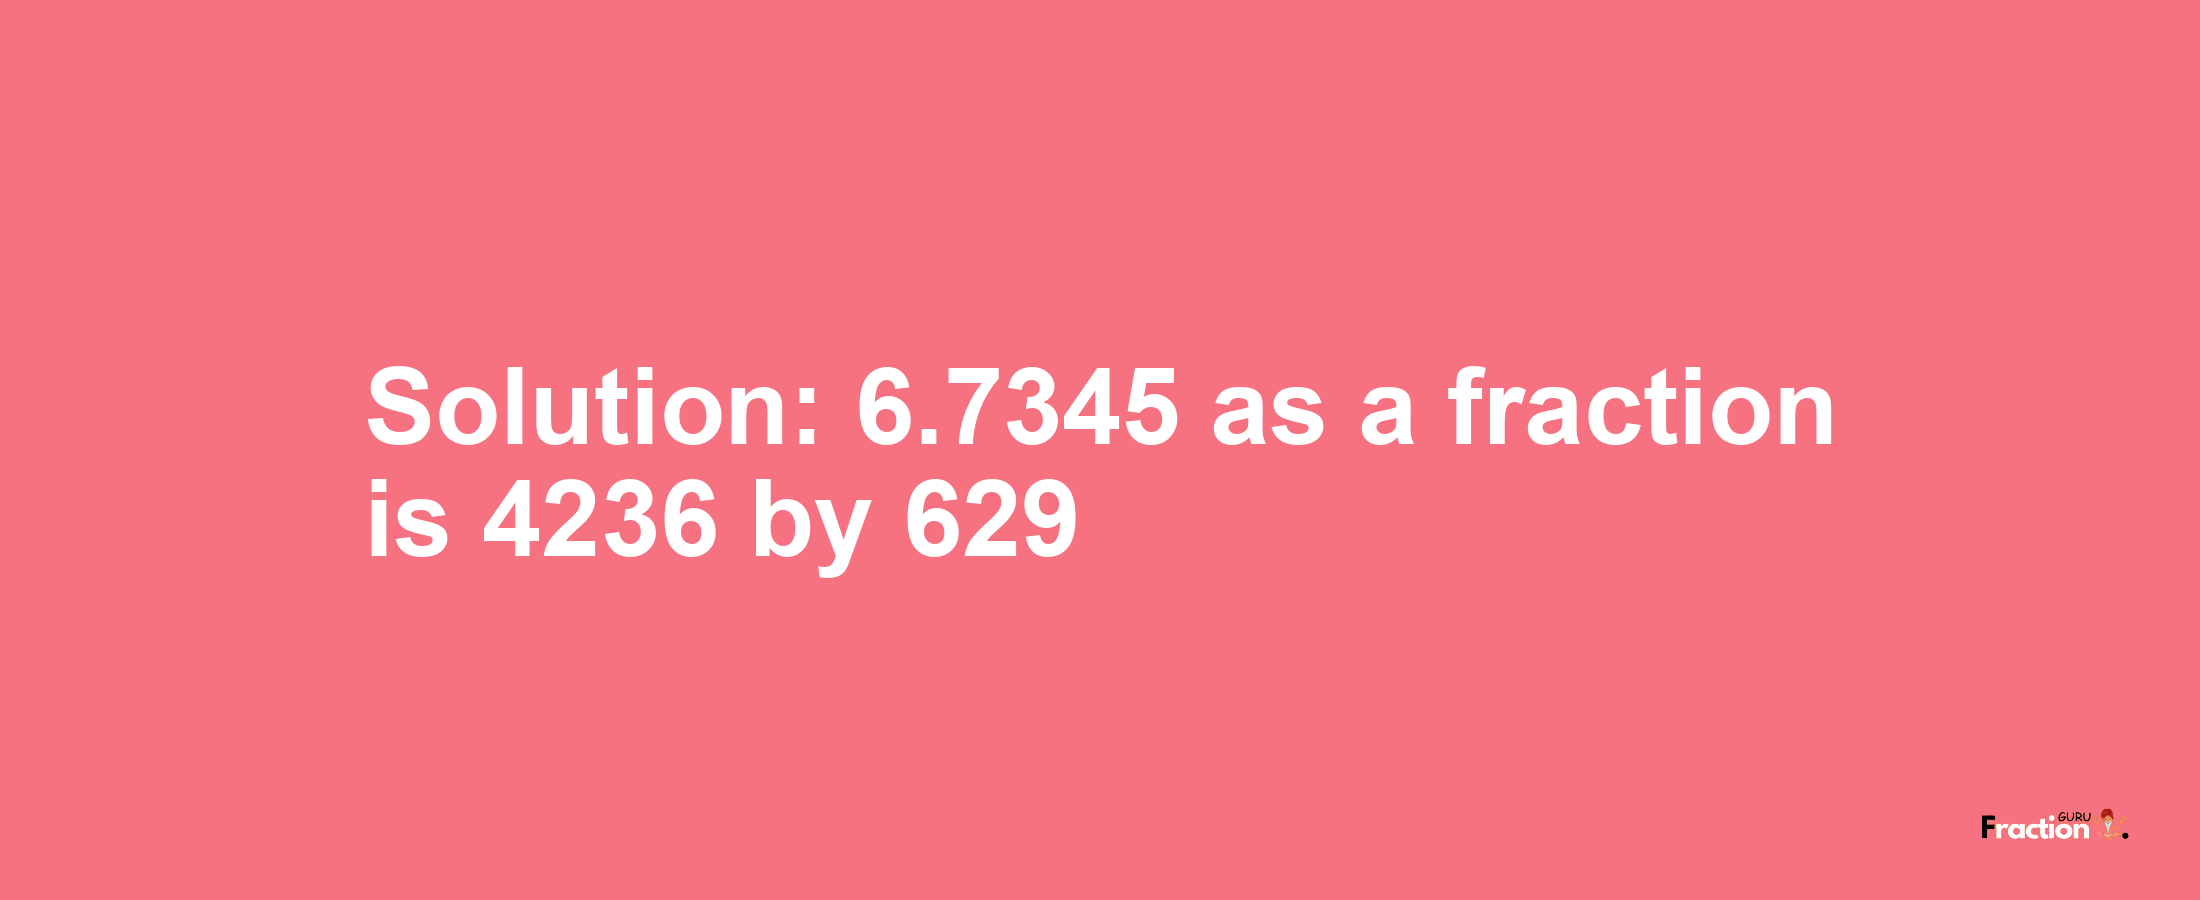 Solution:6.7345 as a fraction is 4236/629